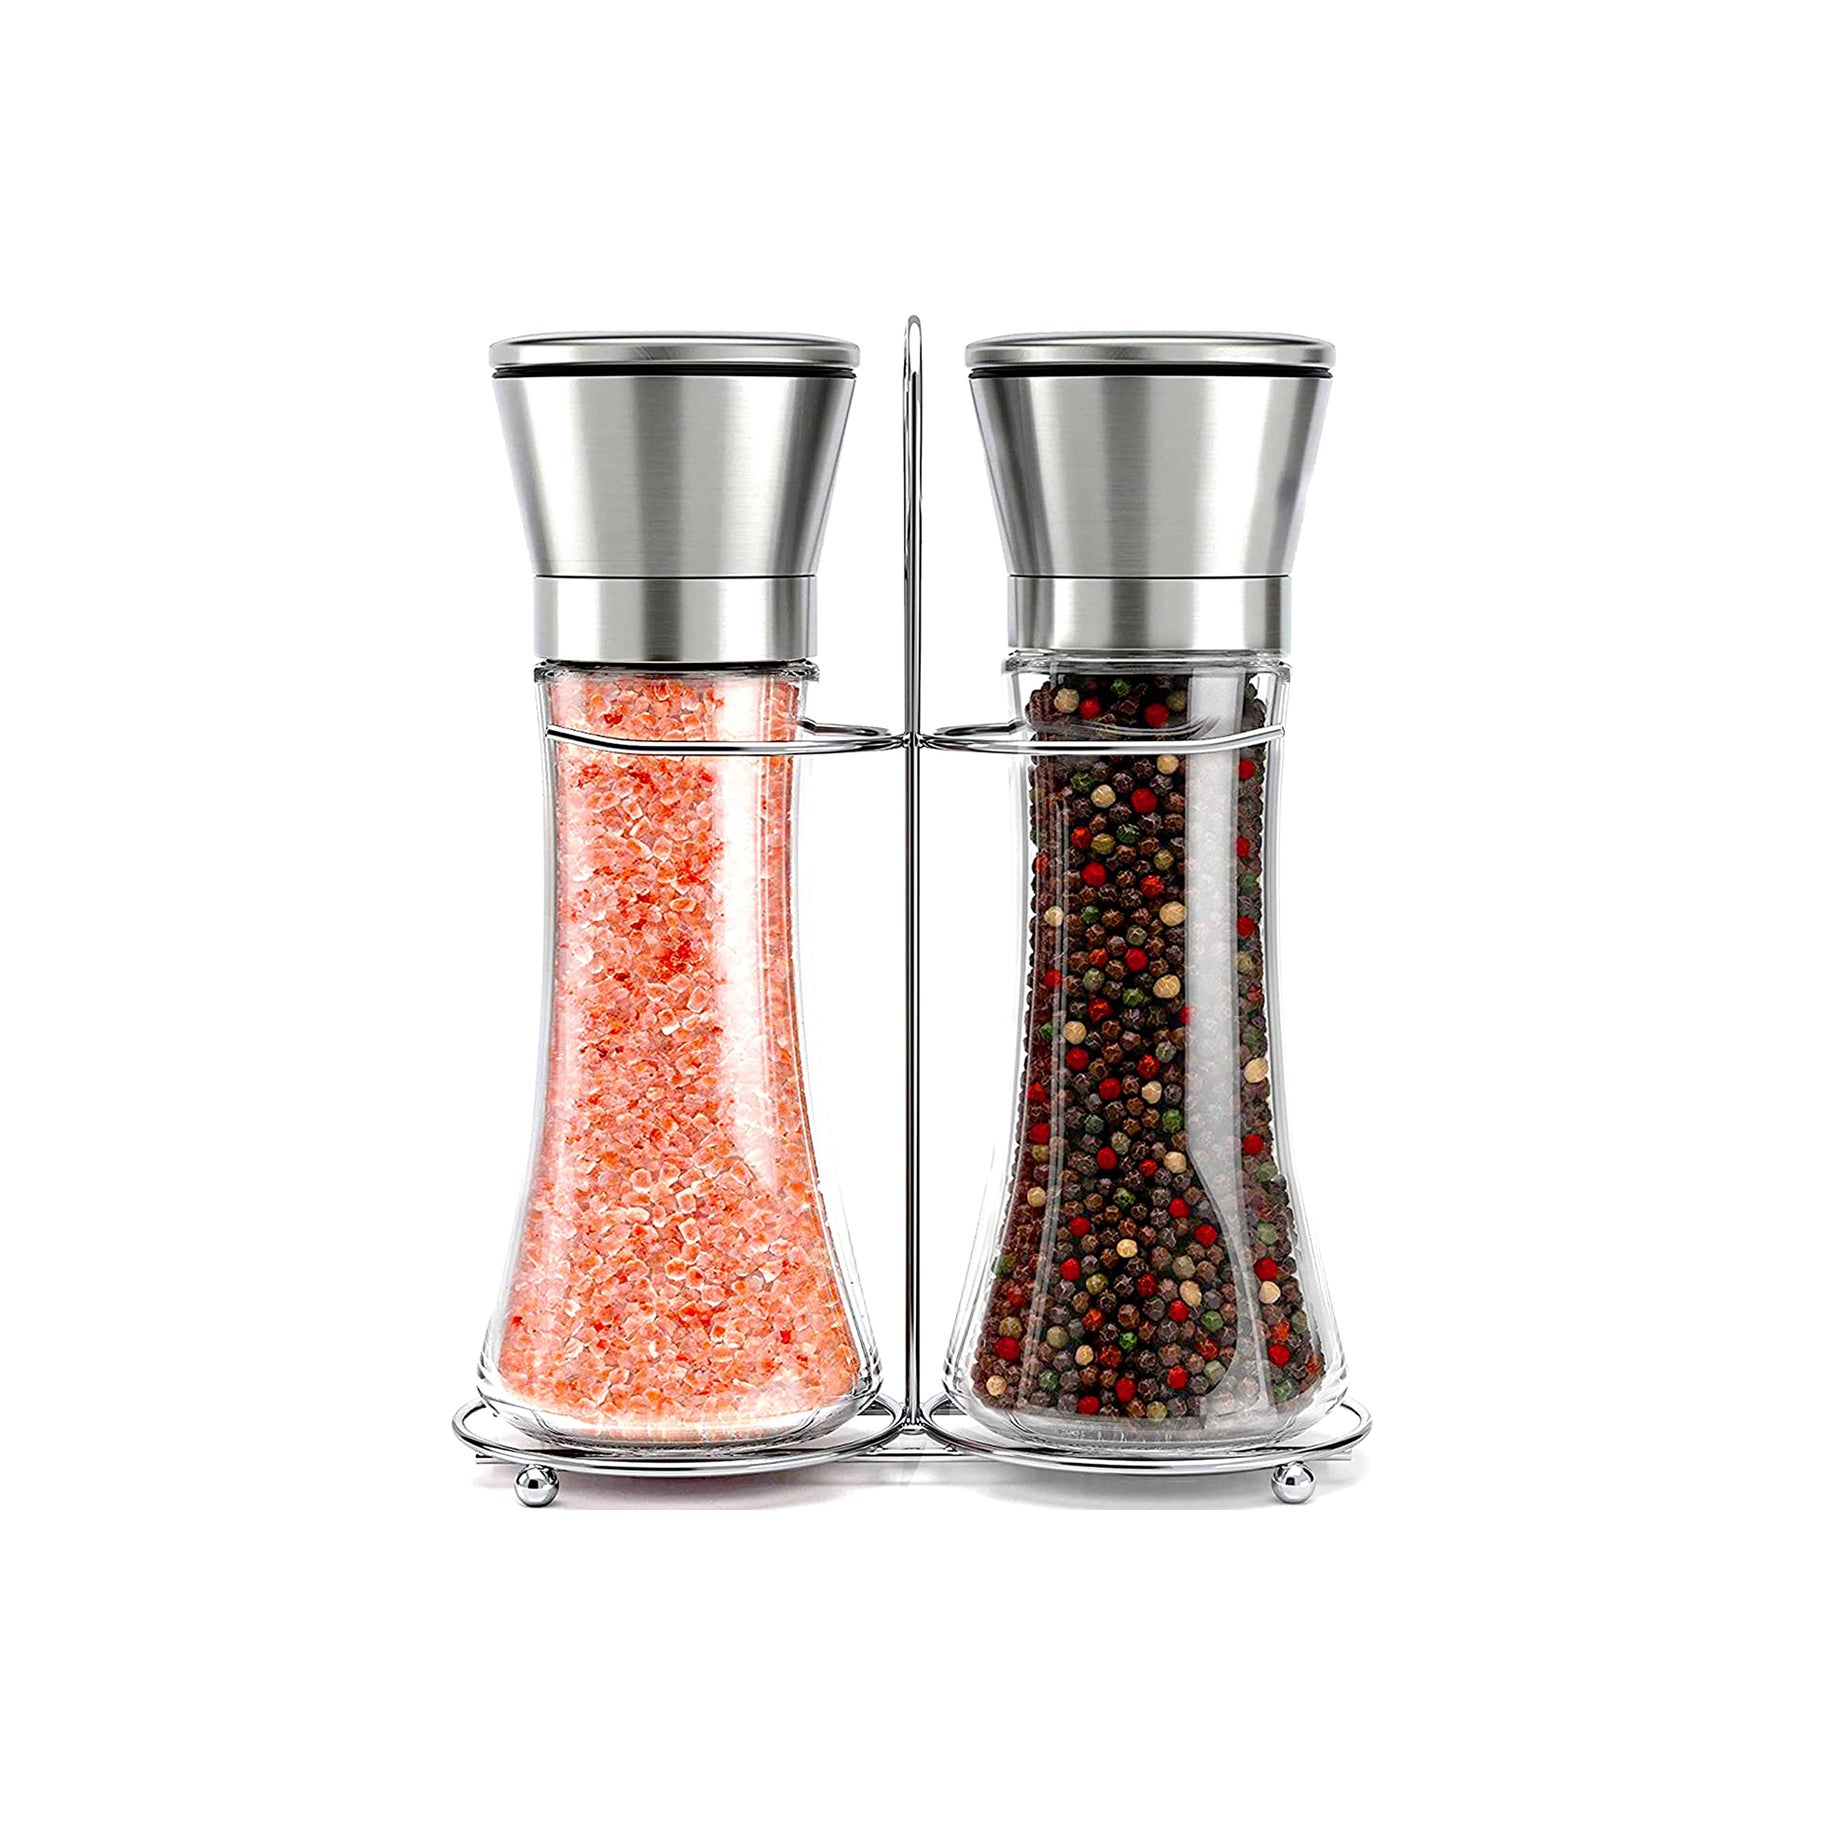 Best Pepper Mill for Style and Functionality